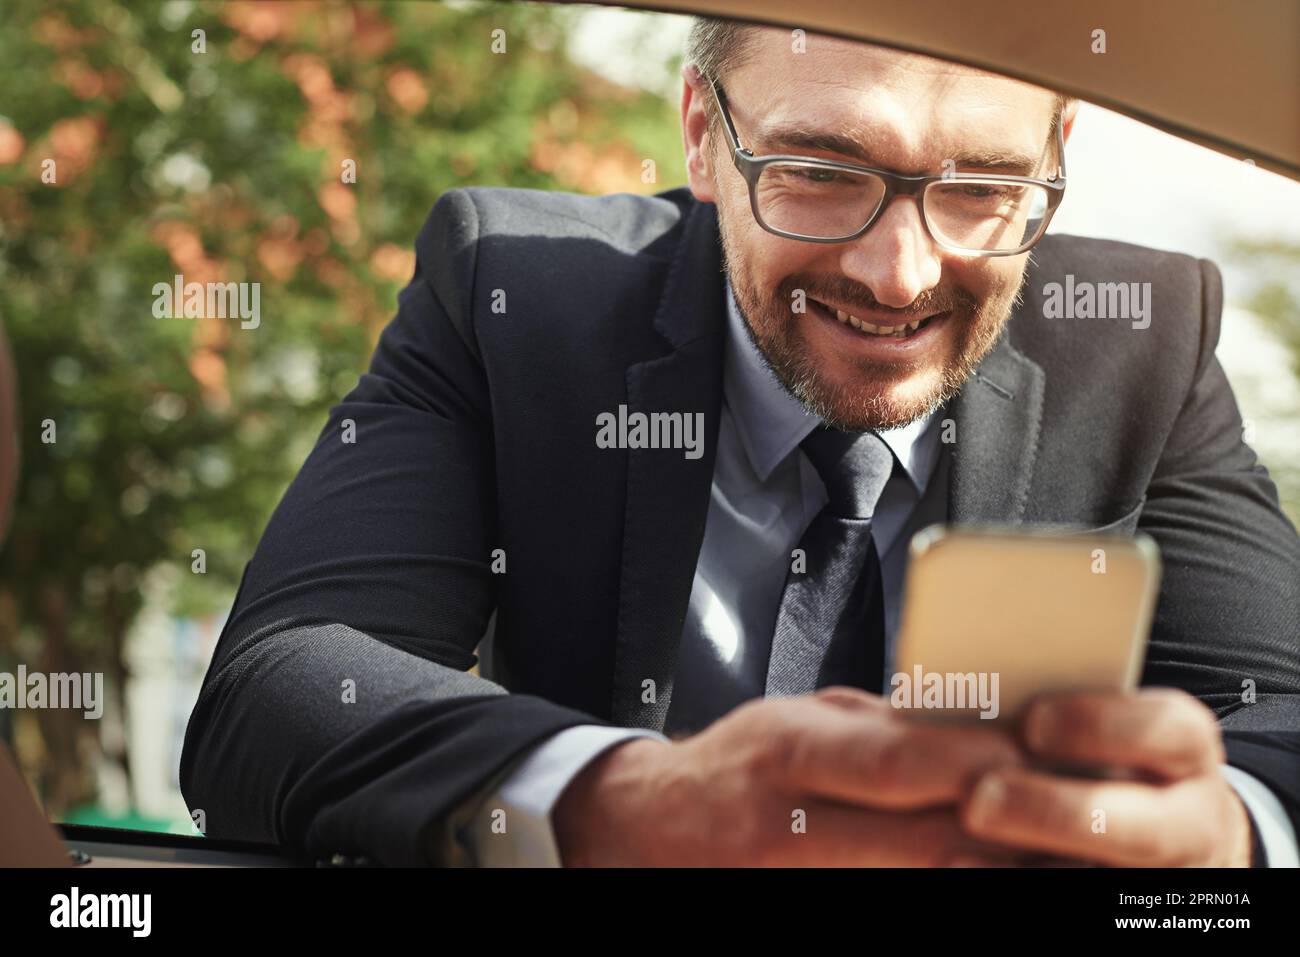 Stopping to send a text. a businessman using a phone while leaning against his car. Stock Photo